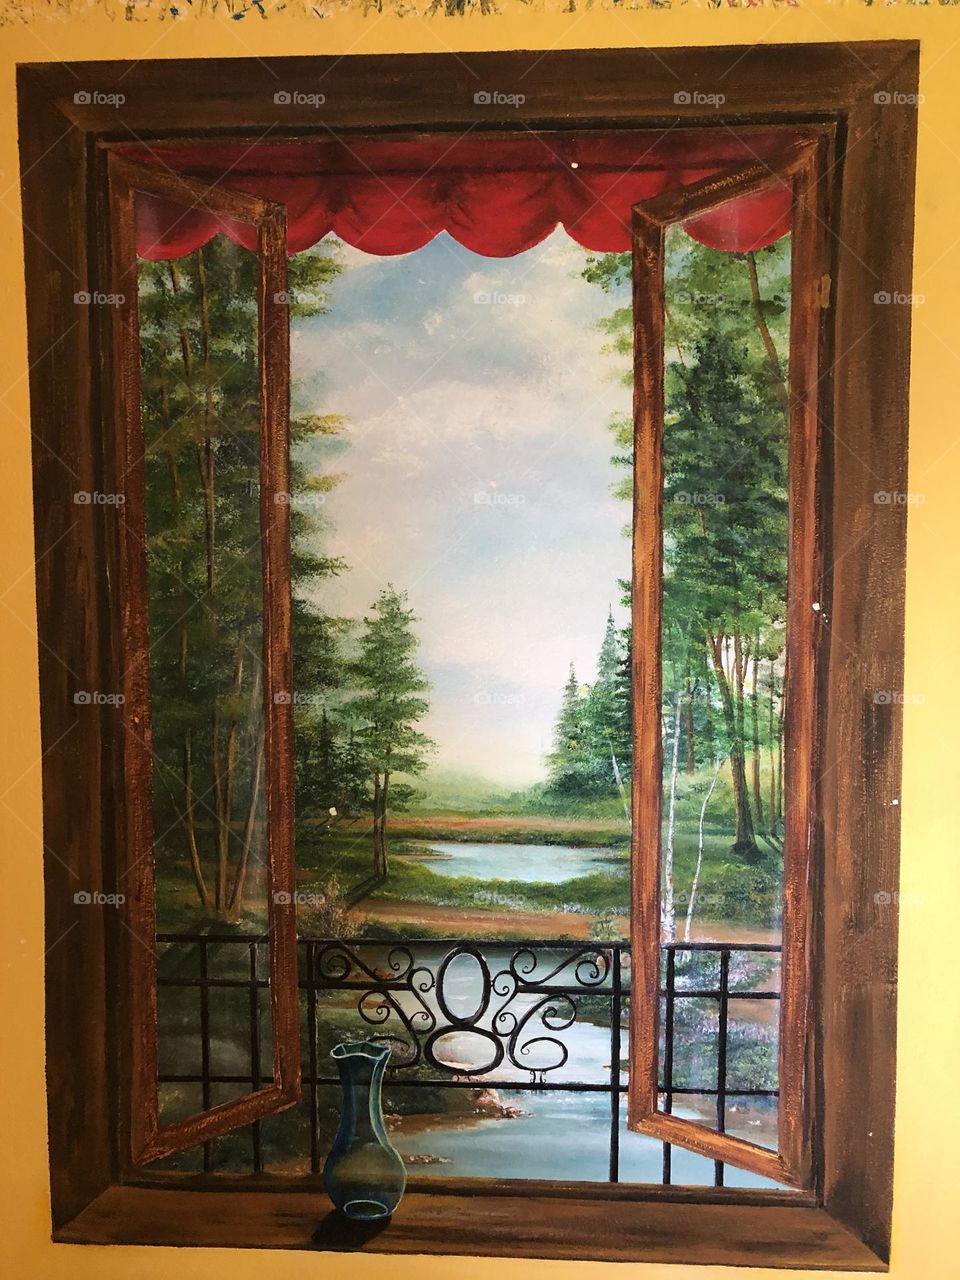 Mural of window with peaceful lake and forrest scene on a wall